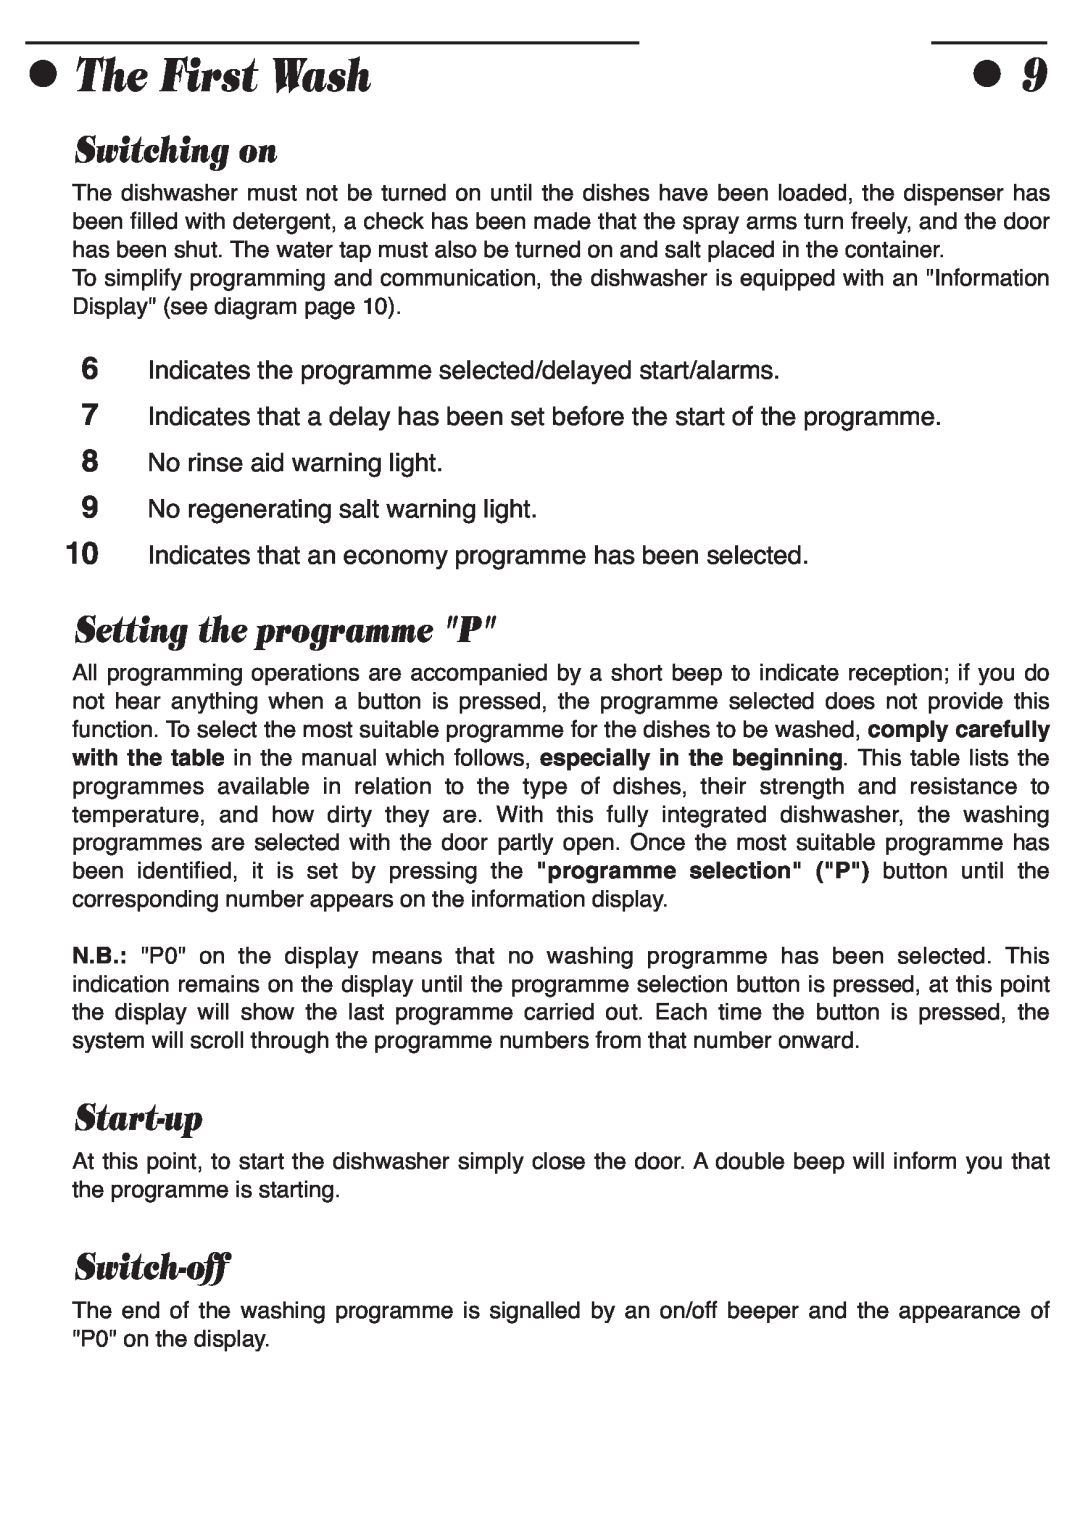 Smeg ADP8252 manual The First Wash, Switching on, Setting the programme P, Start-up, Switch-off 